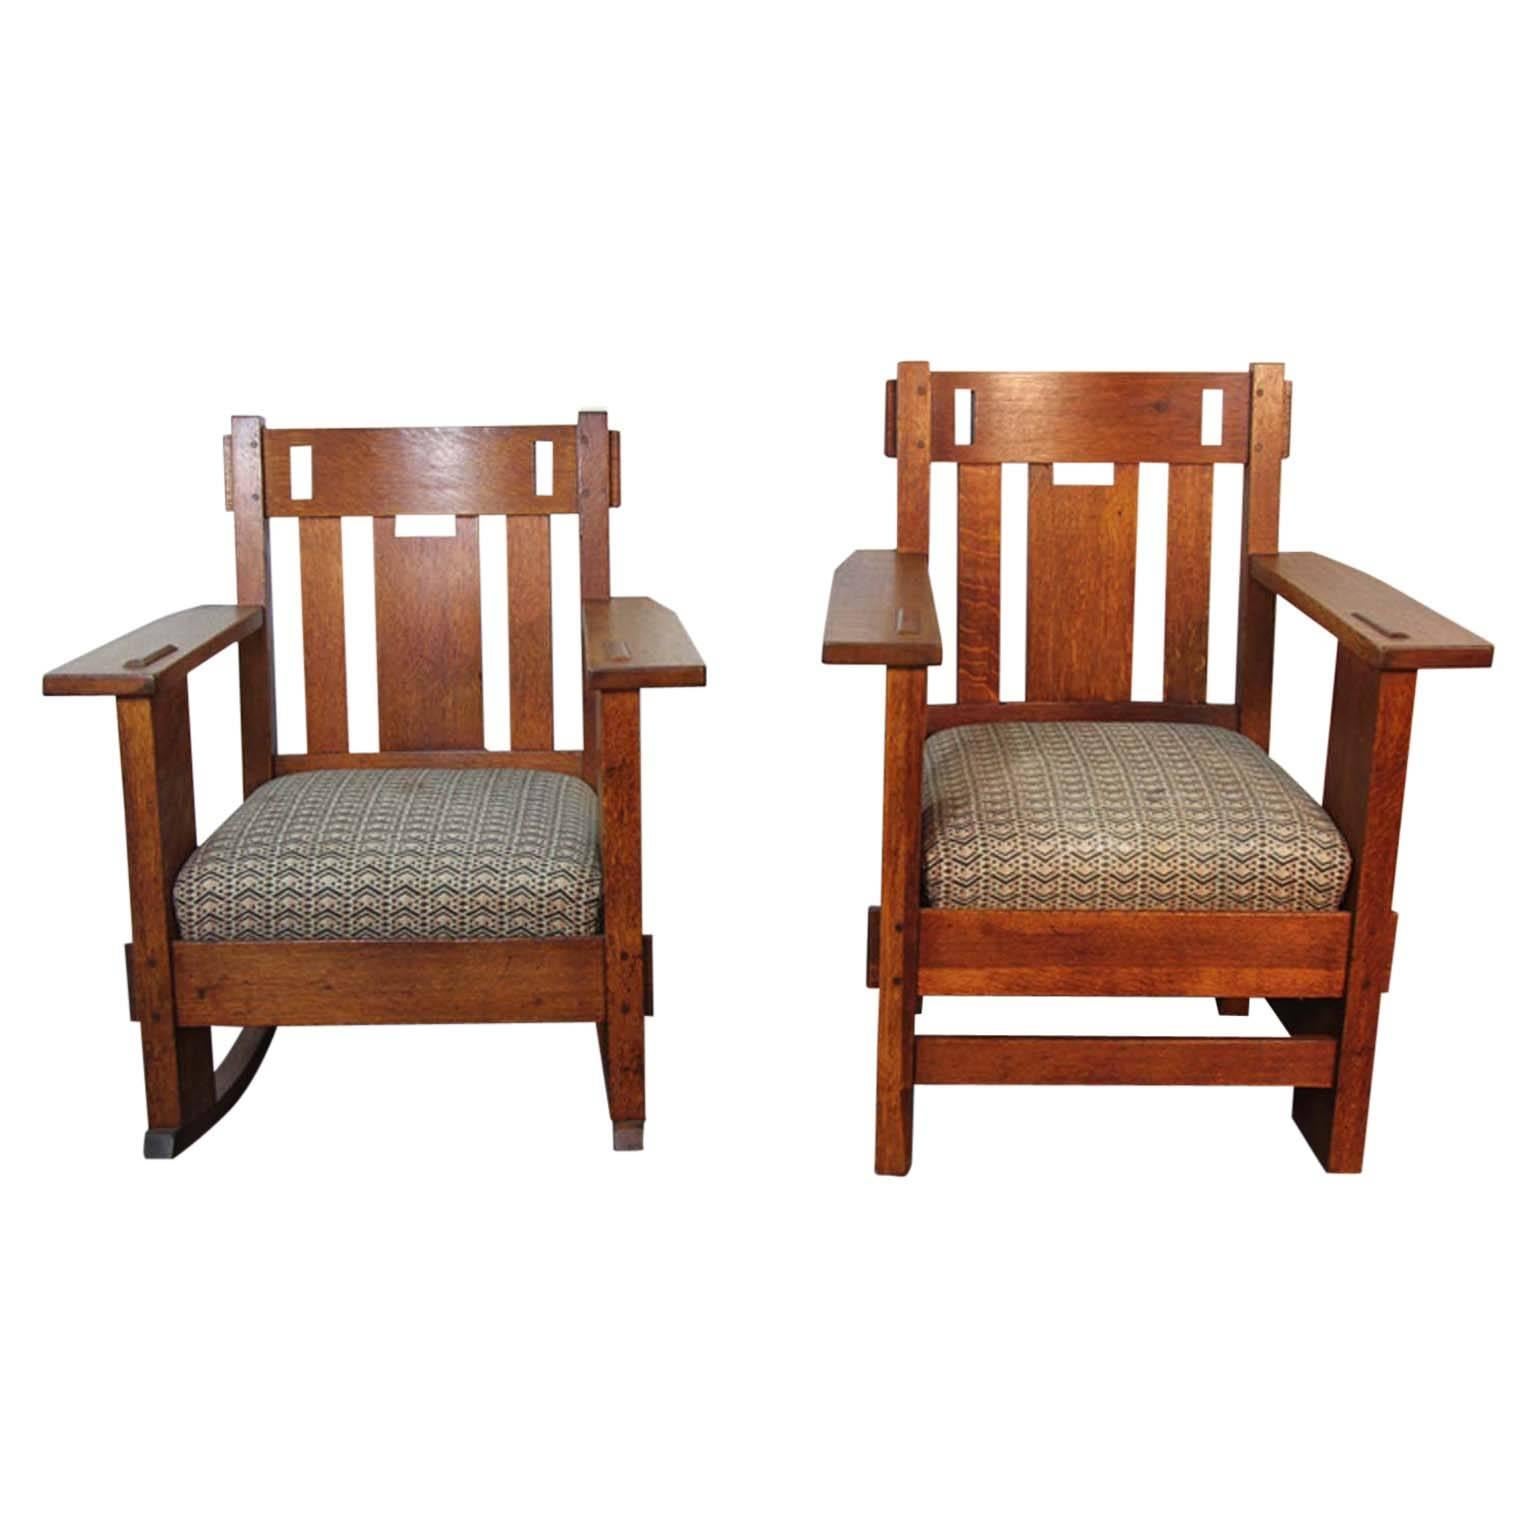 Pair of Gustav Stickley Armchair and Rocking with Frank Lloyd Wright Upholstery For Sale